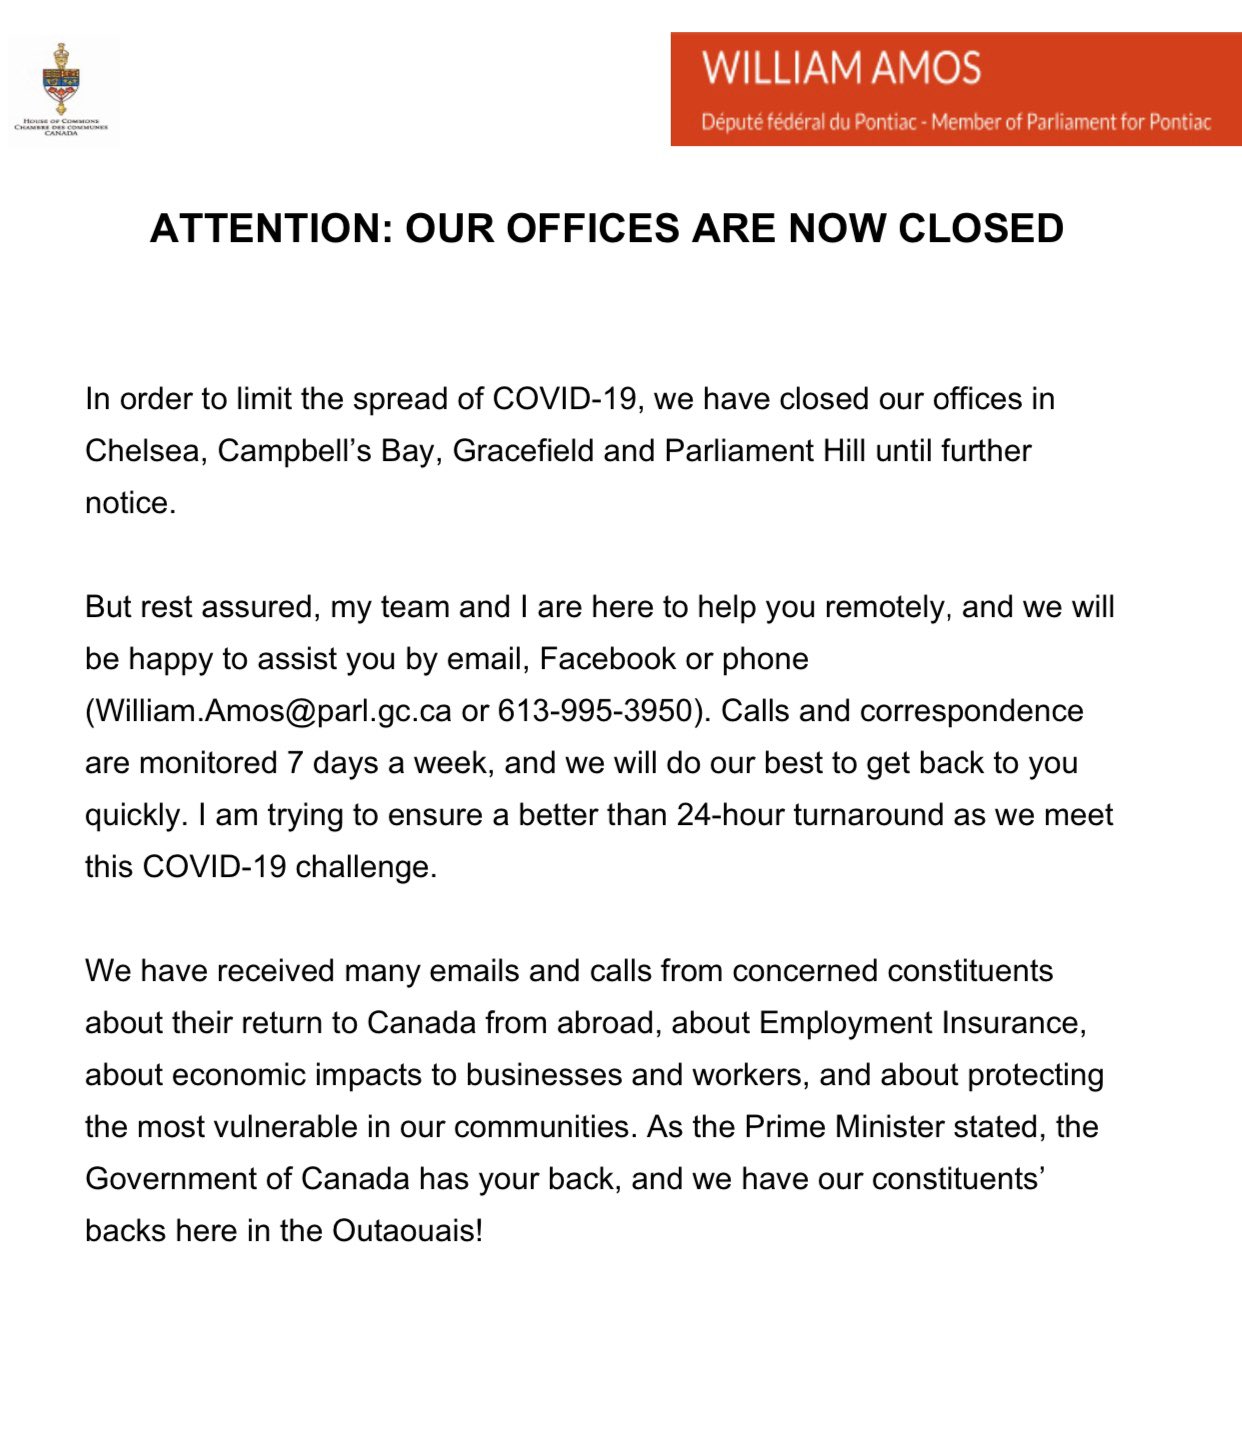 William Amos In Order To Limit The Spread Of Covid19 We Have Closed Our Offices Until Further Notice My Team And I Will Be Happy To Assist You By Email